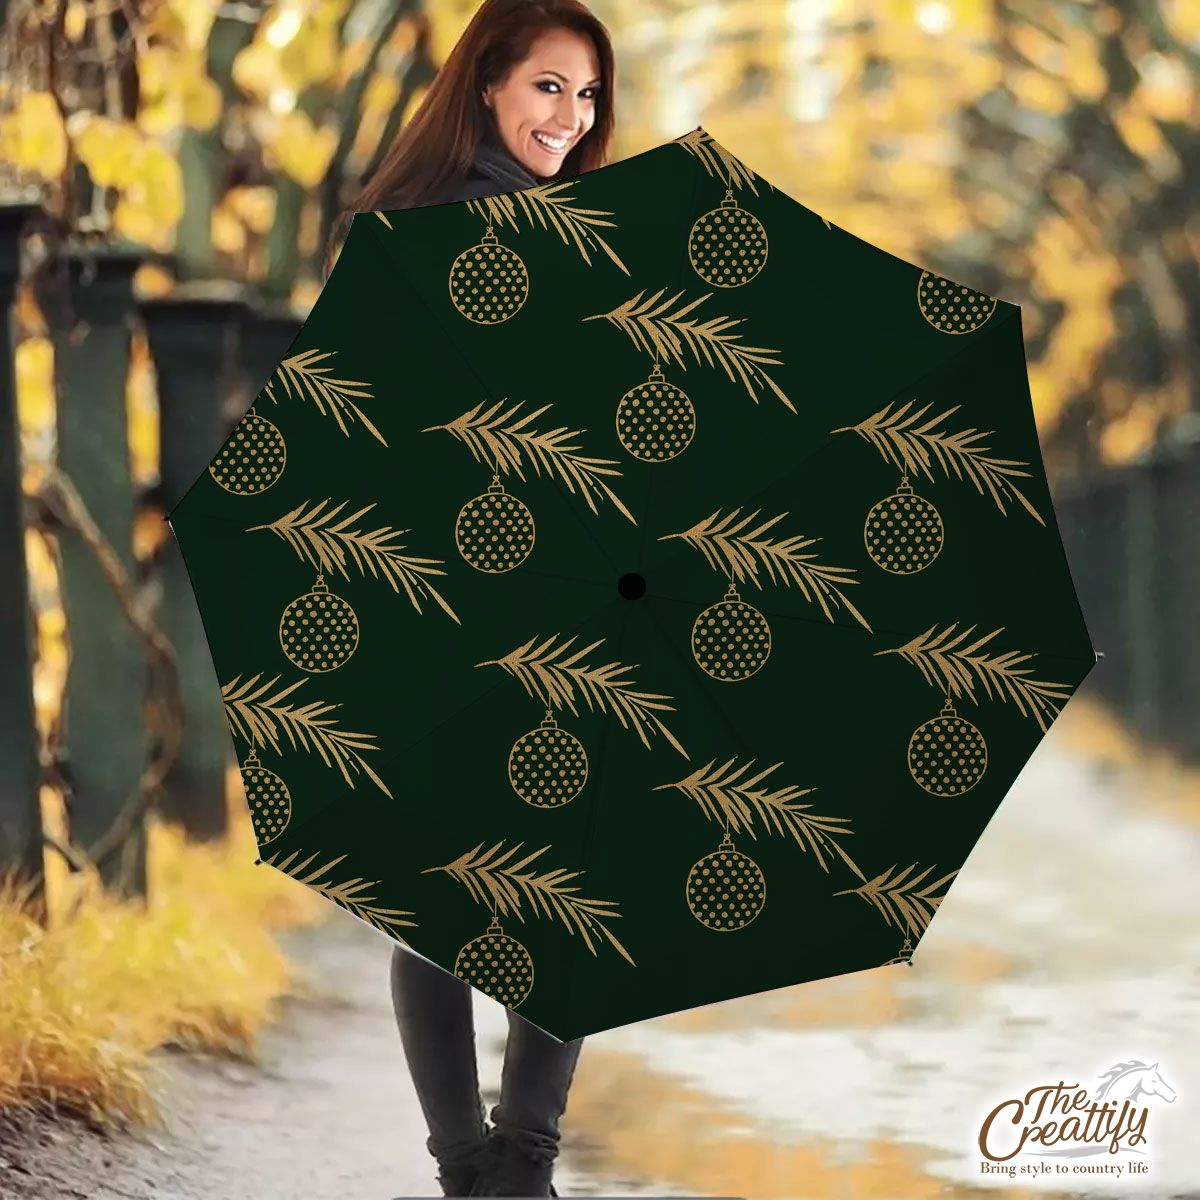 Gold And Green Christmas Bow And Christmas Tree Branch Umbrella